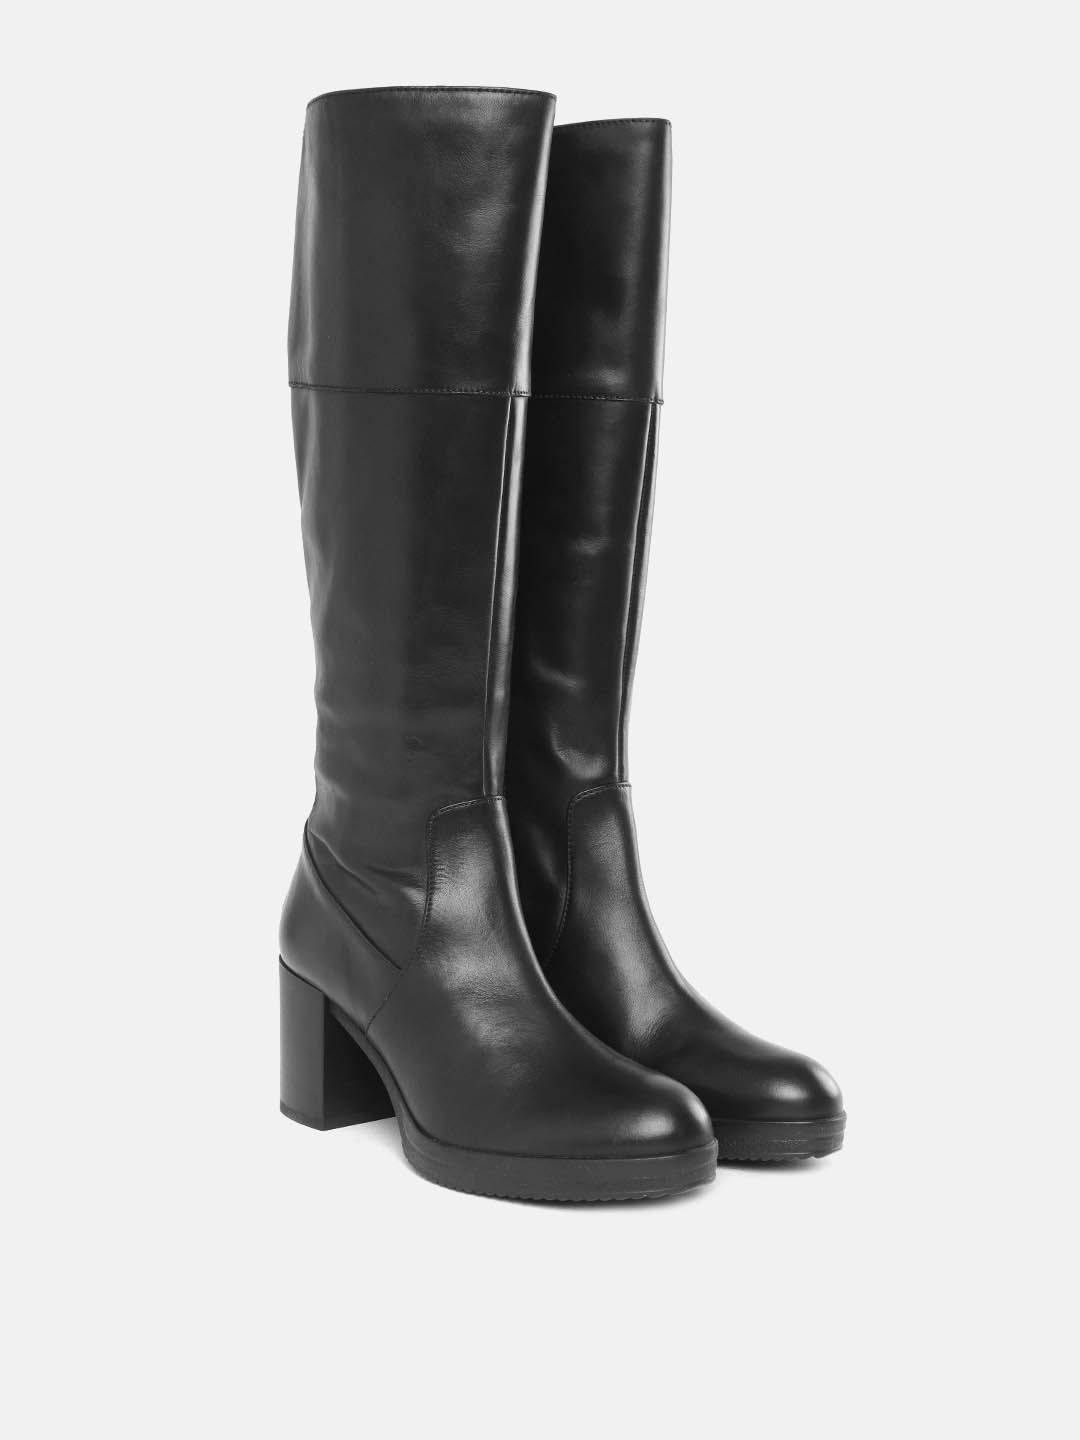 Geox Women Black Leather High-Top Block Heeled Boots Price in India